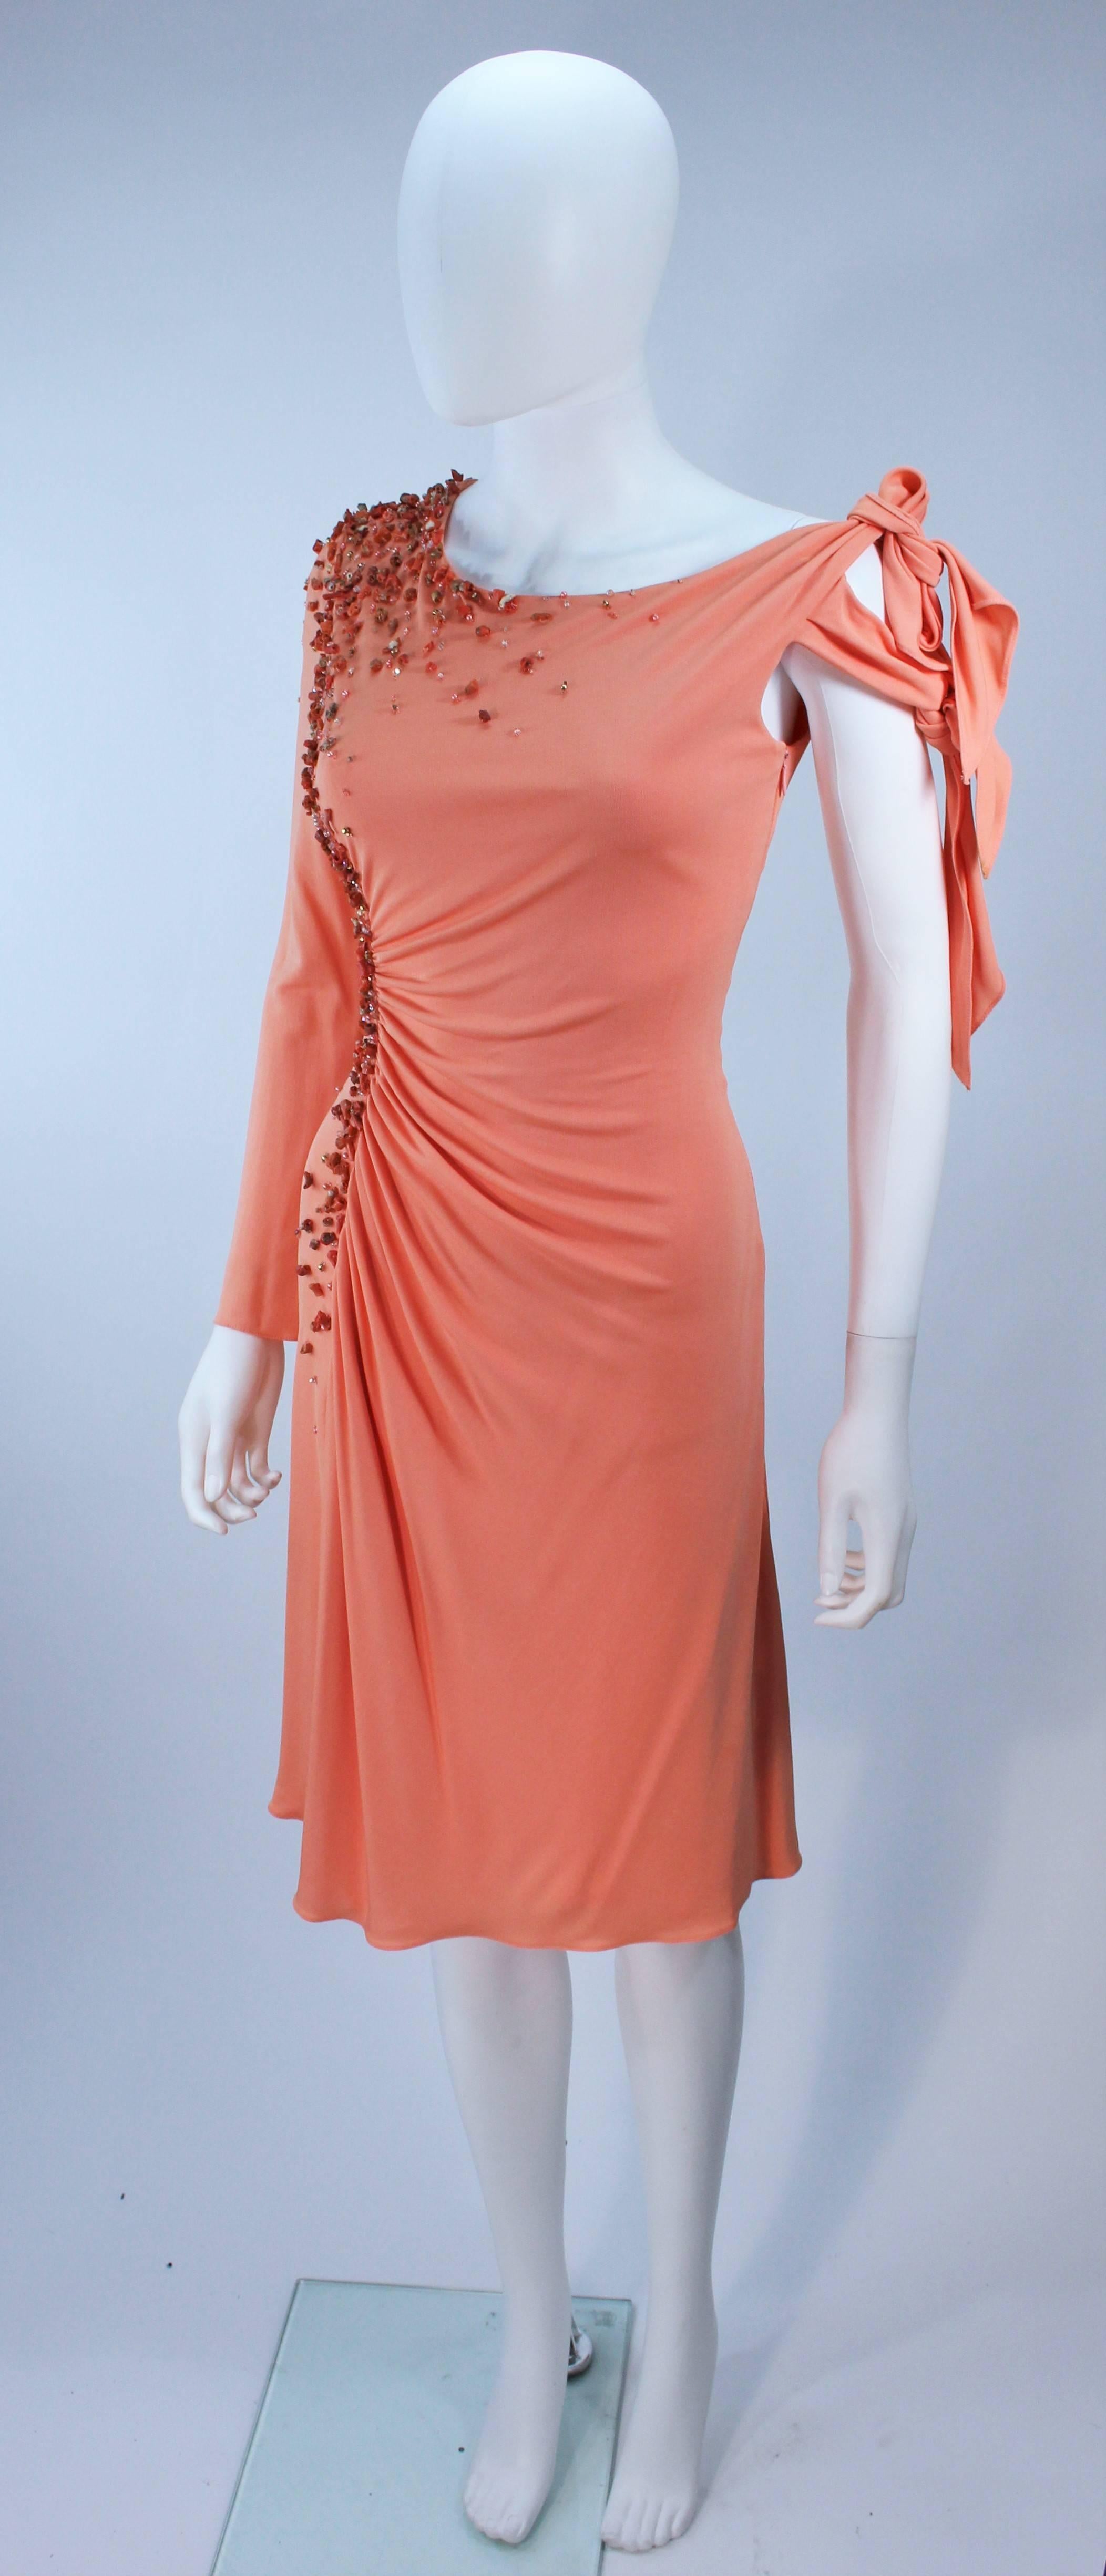 Orange MARK ZUNINO Coral Jersey Cocktail Dress with Coral Beading Applique Size 6 8 For Sale